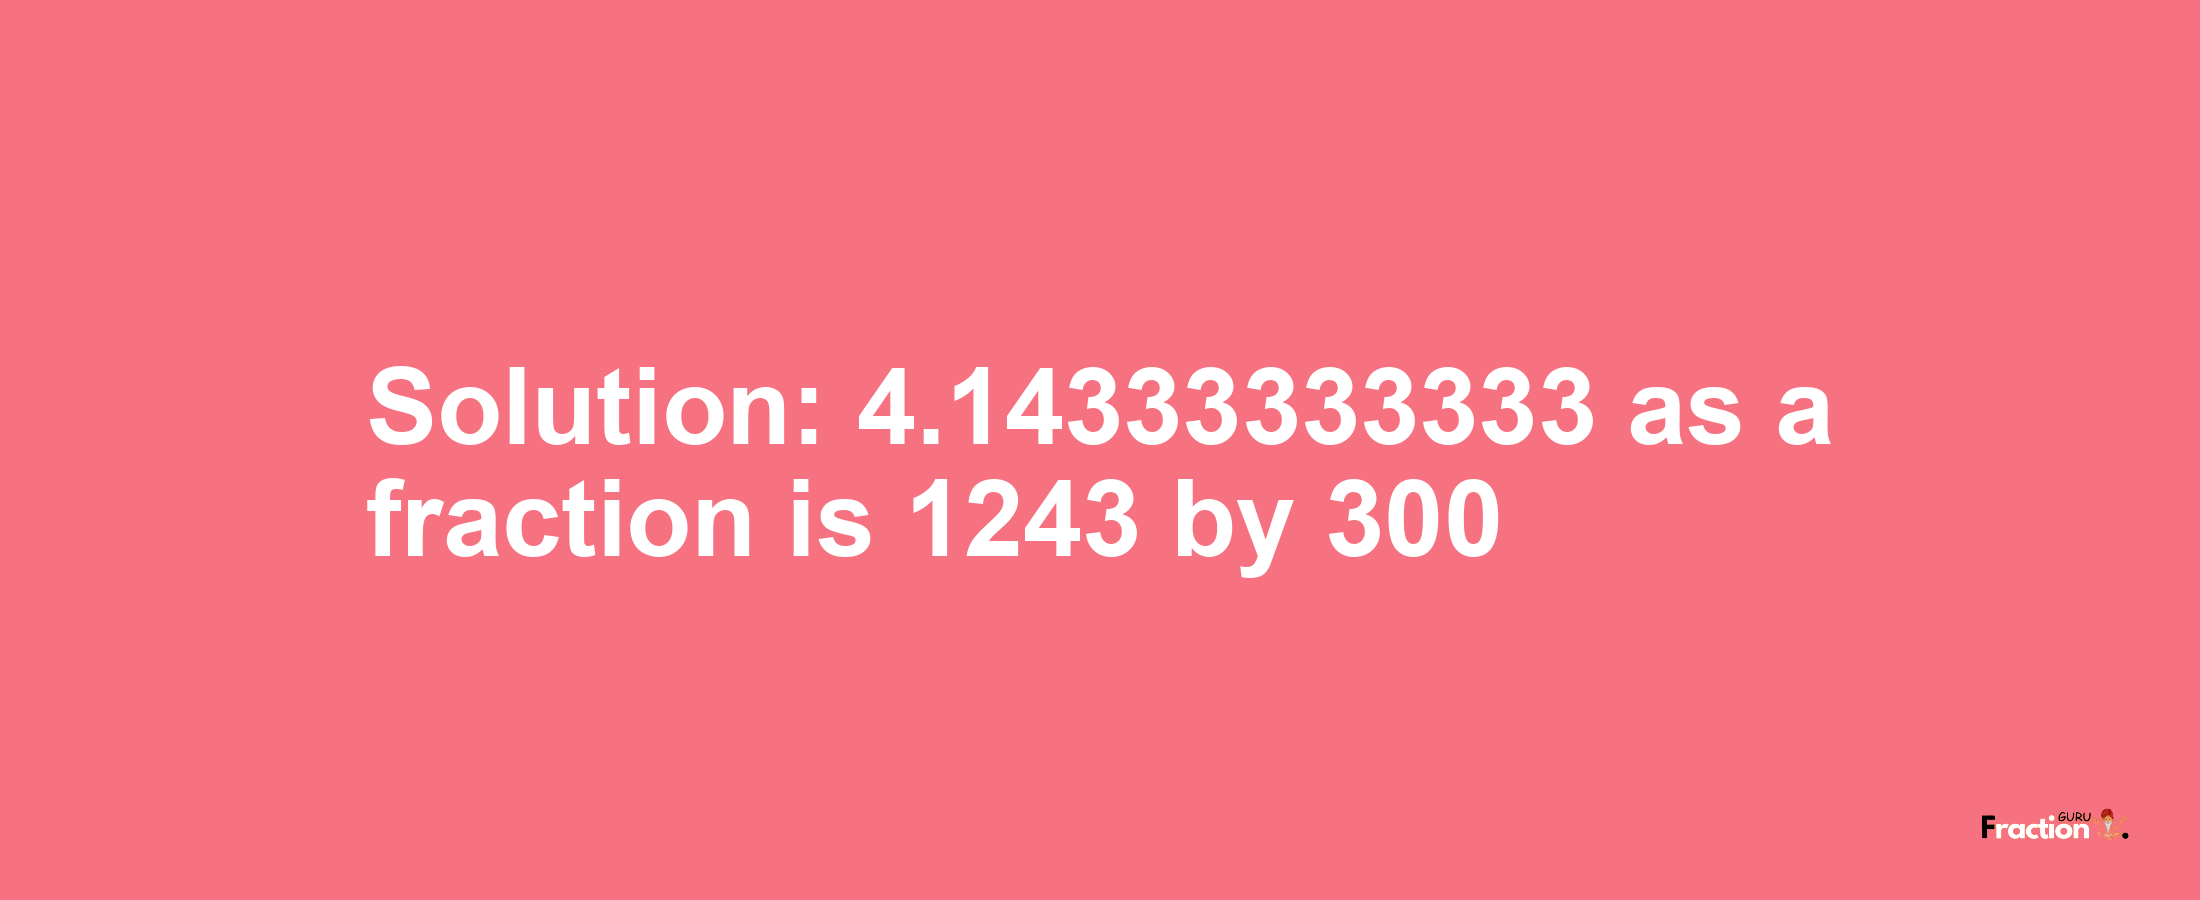 Solution:4.14333333333 as a fraction is 1243/300